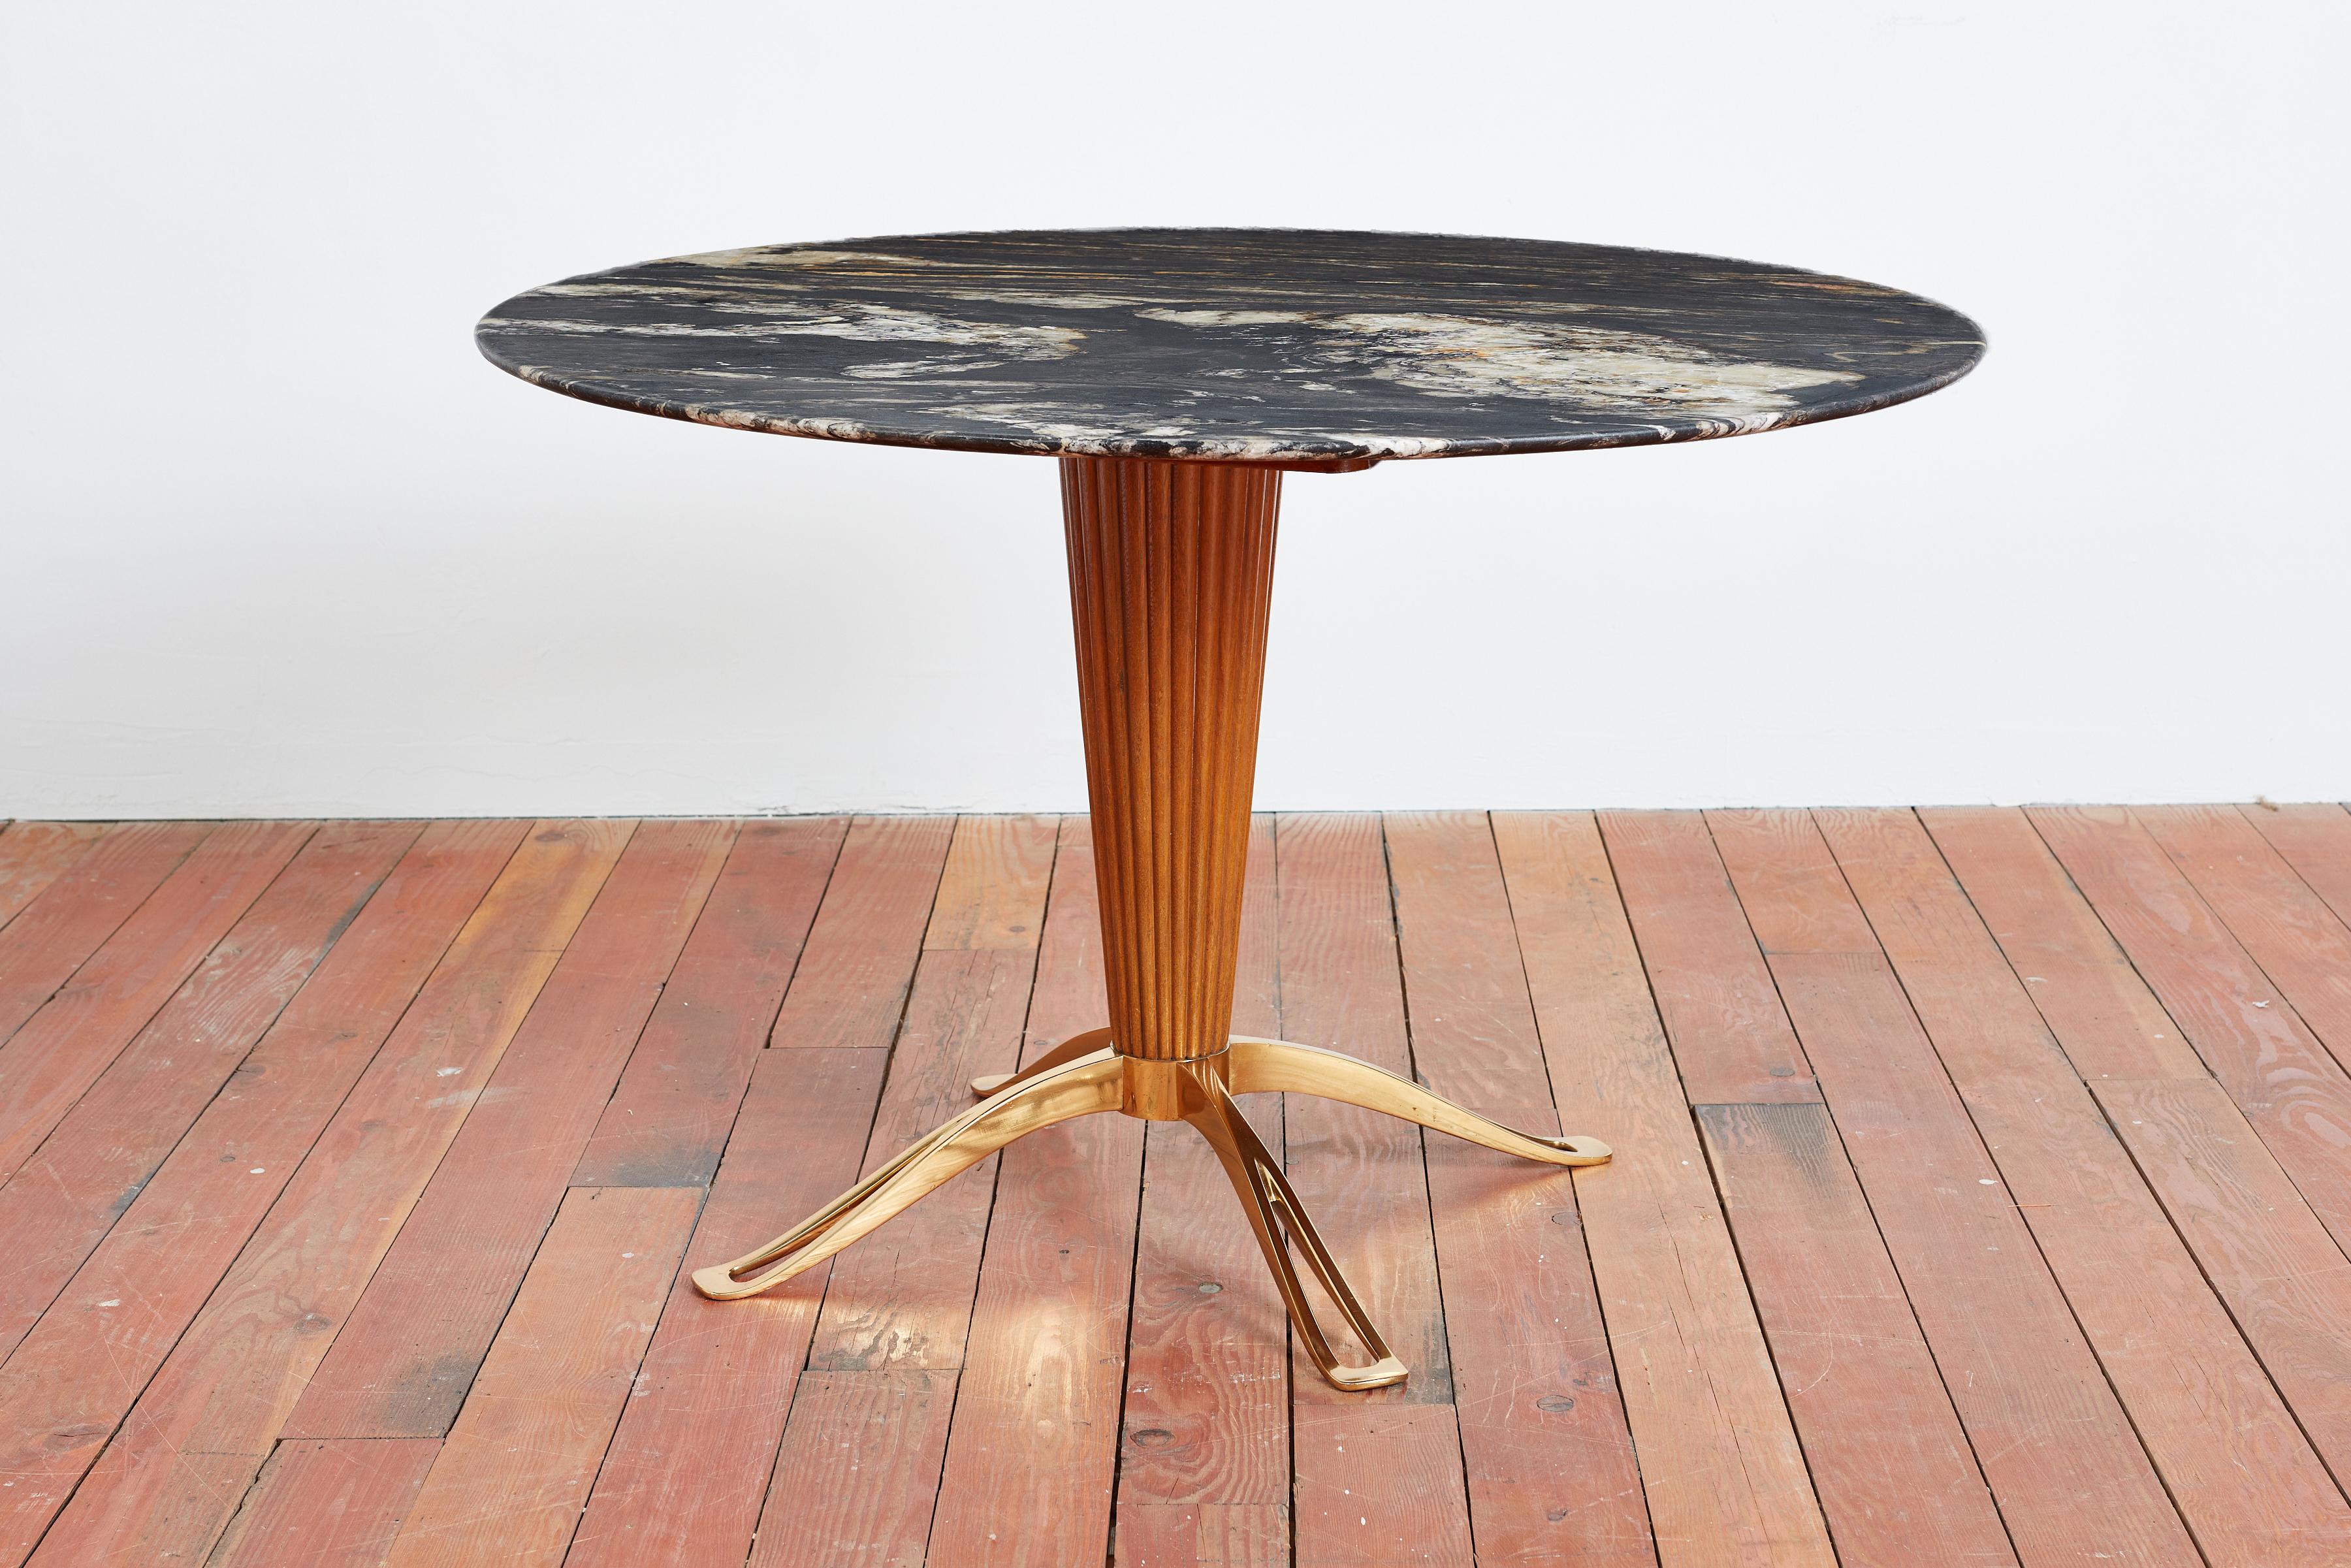 Incredible table by Paolo Buffa - Italy, 1950s
Sculptural solid brass base with fluted walnut wood and gorgeous black marble top. 